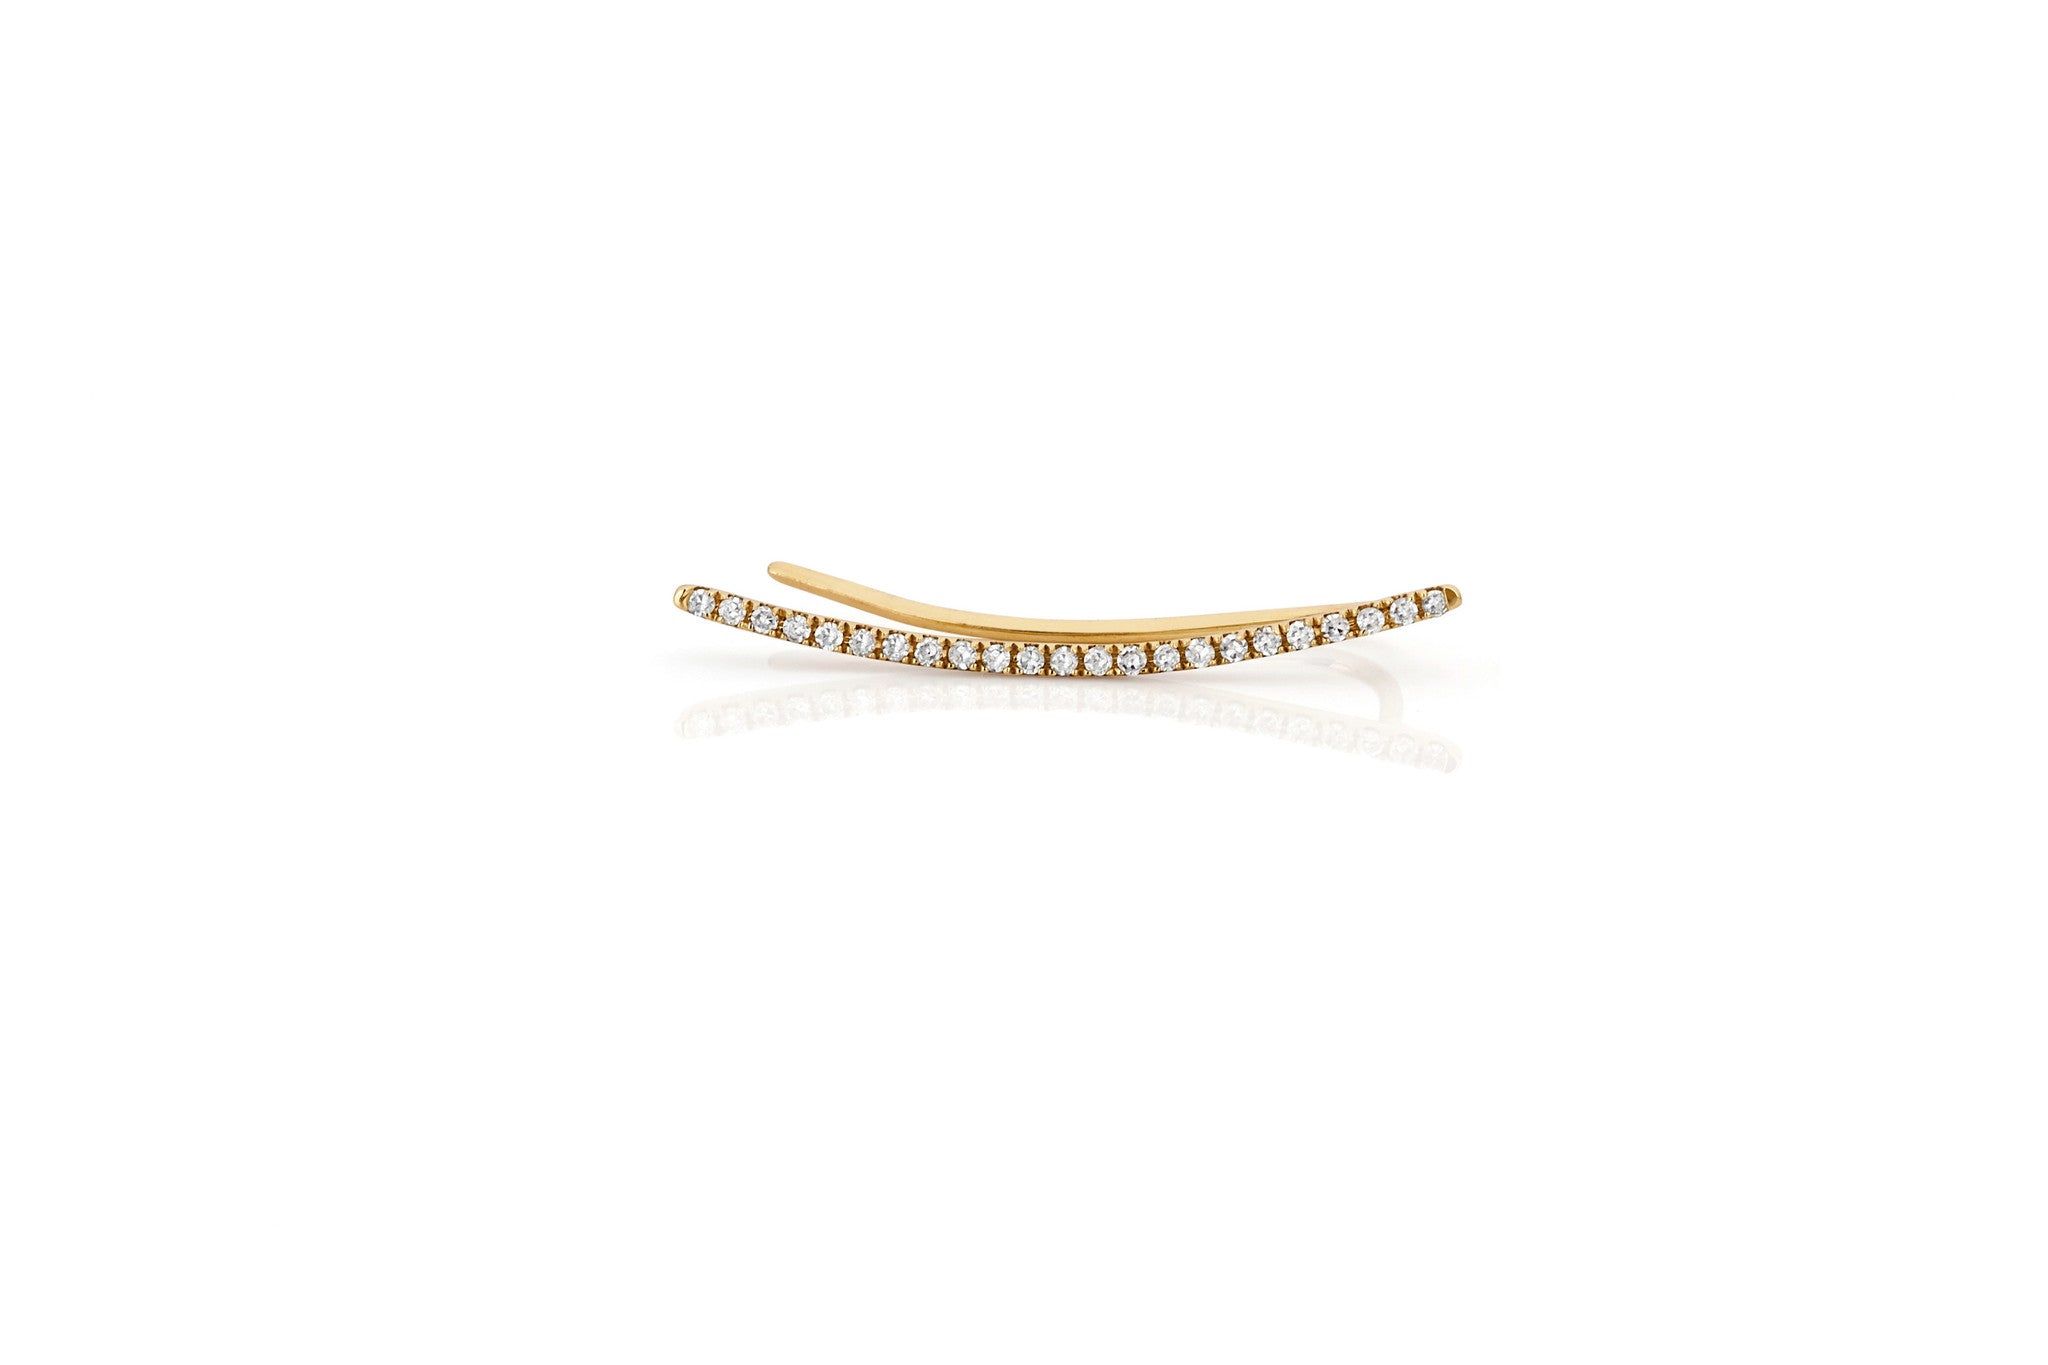 EF Collection Diamond Curved Bar Ear Cuff in 14k Yellow Gold